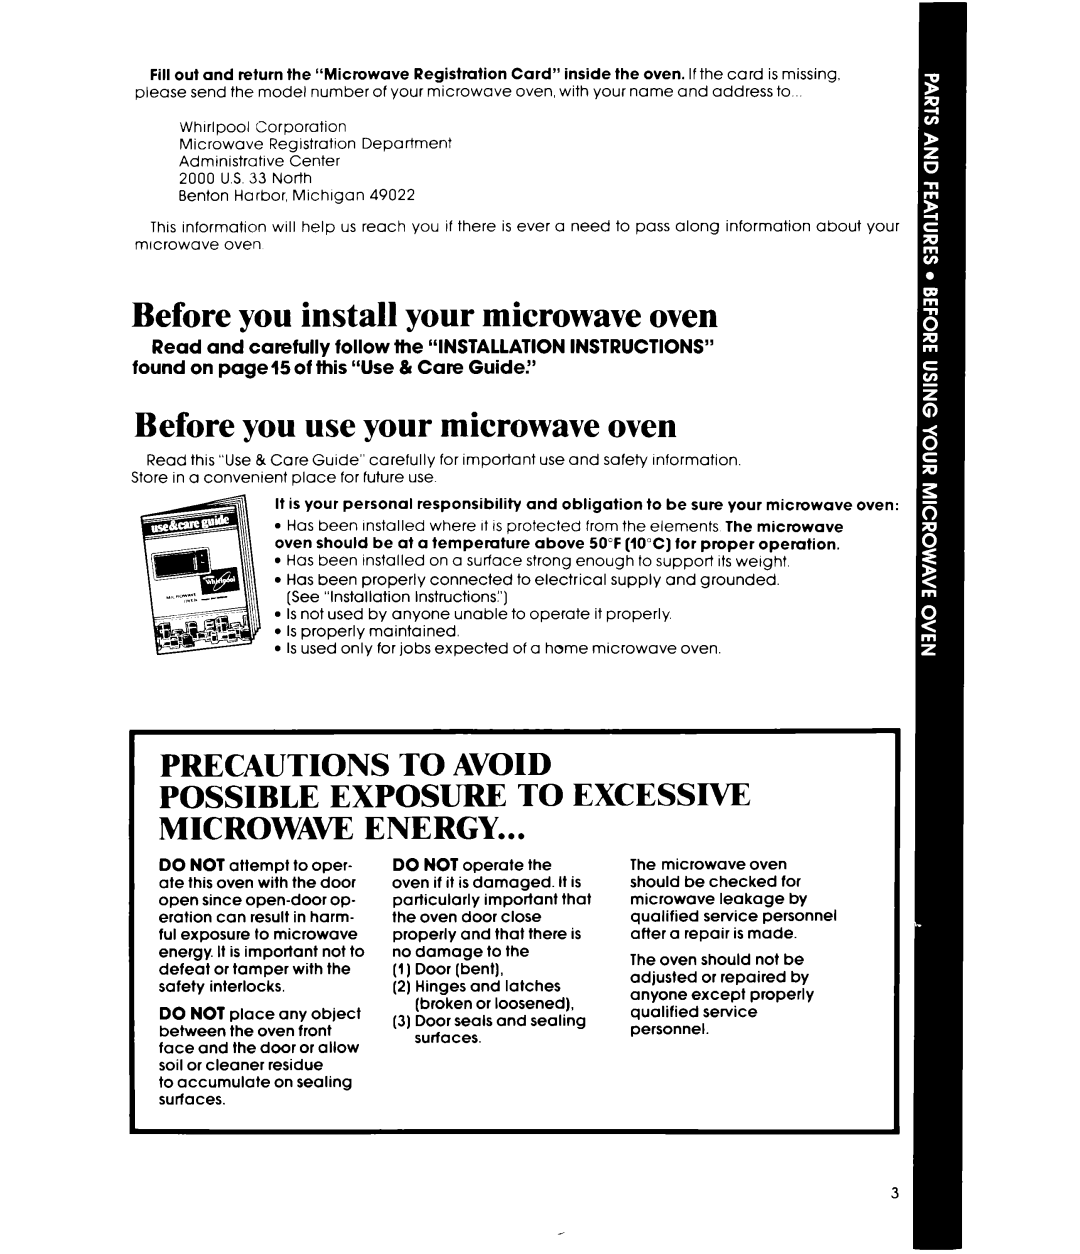 Whirlpool MW1500XP manual Before you install your microwave oven, Before you use your microwave oven, Precautions To Avoid 